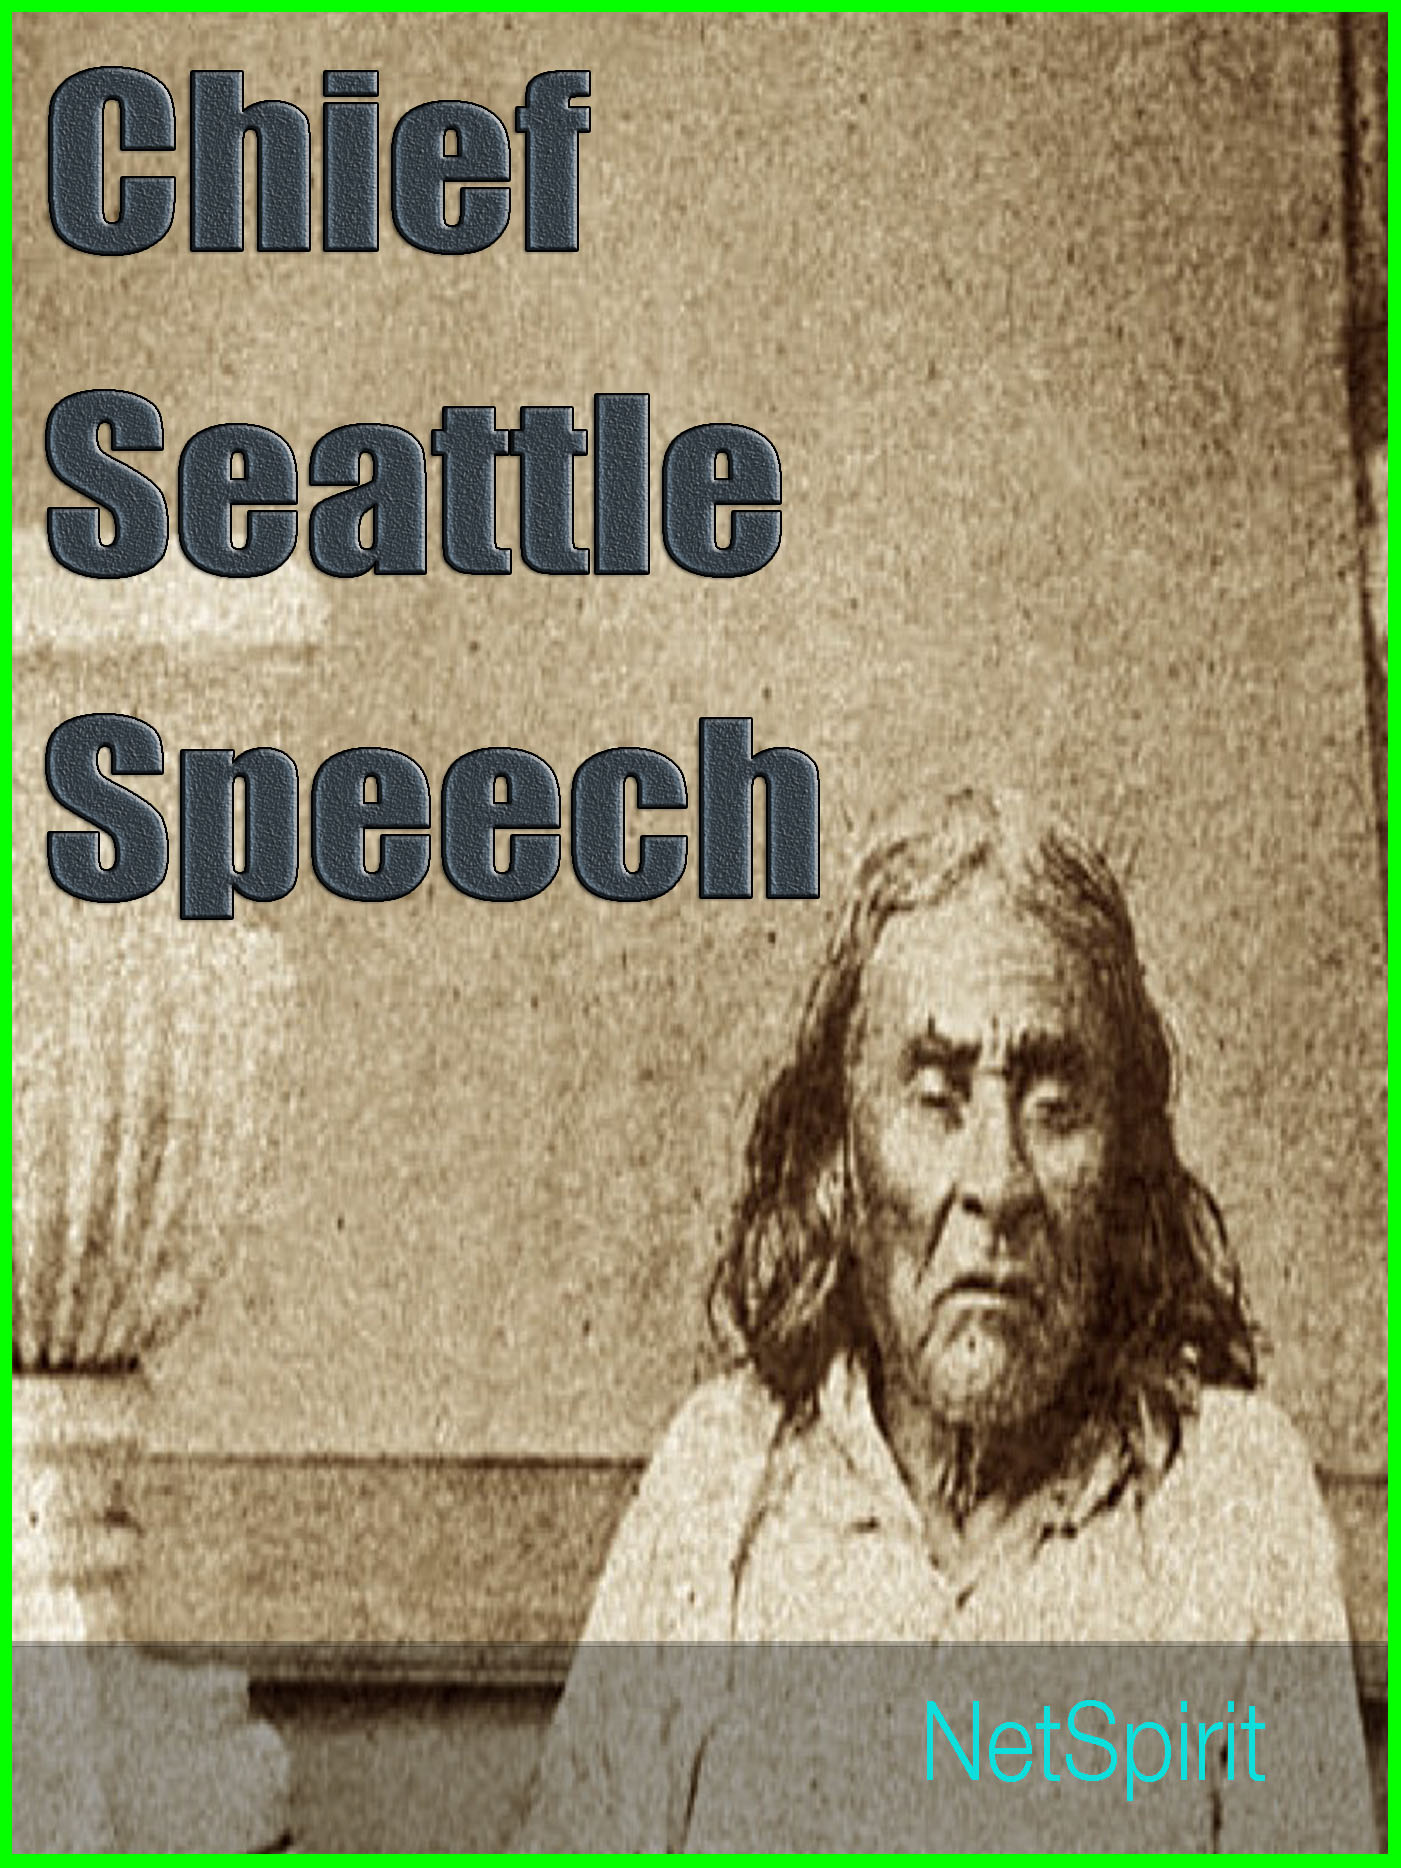 Smashwords Chief Seattle speech We are part of the earth and it is